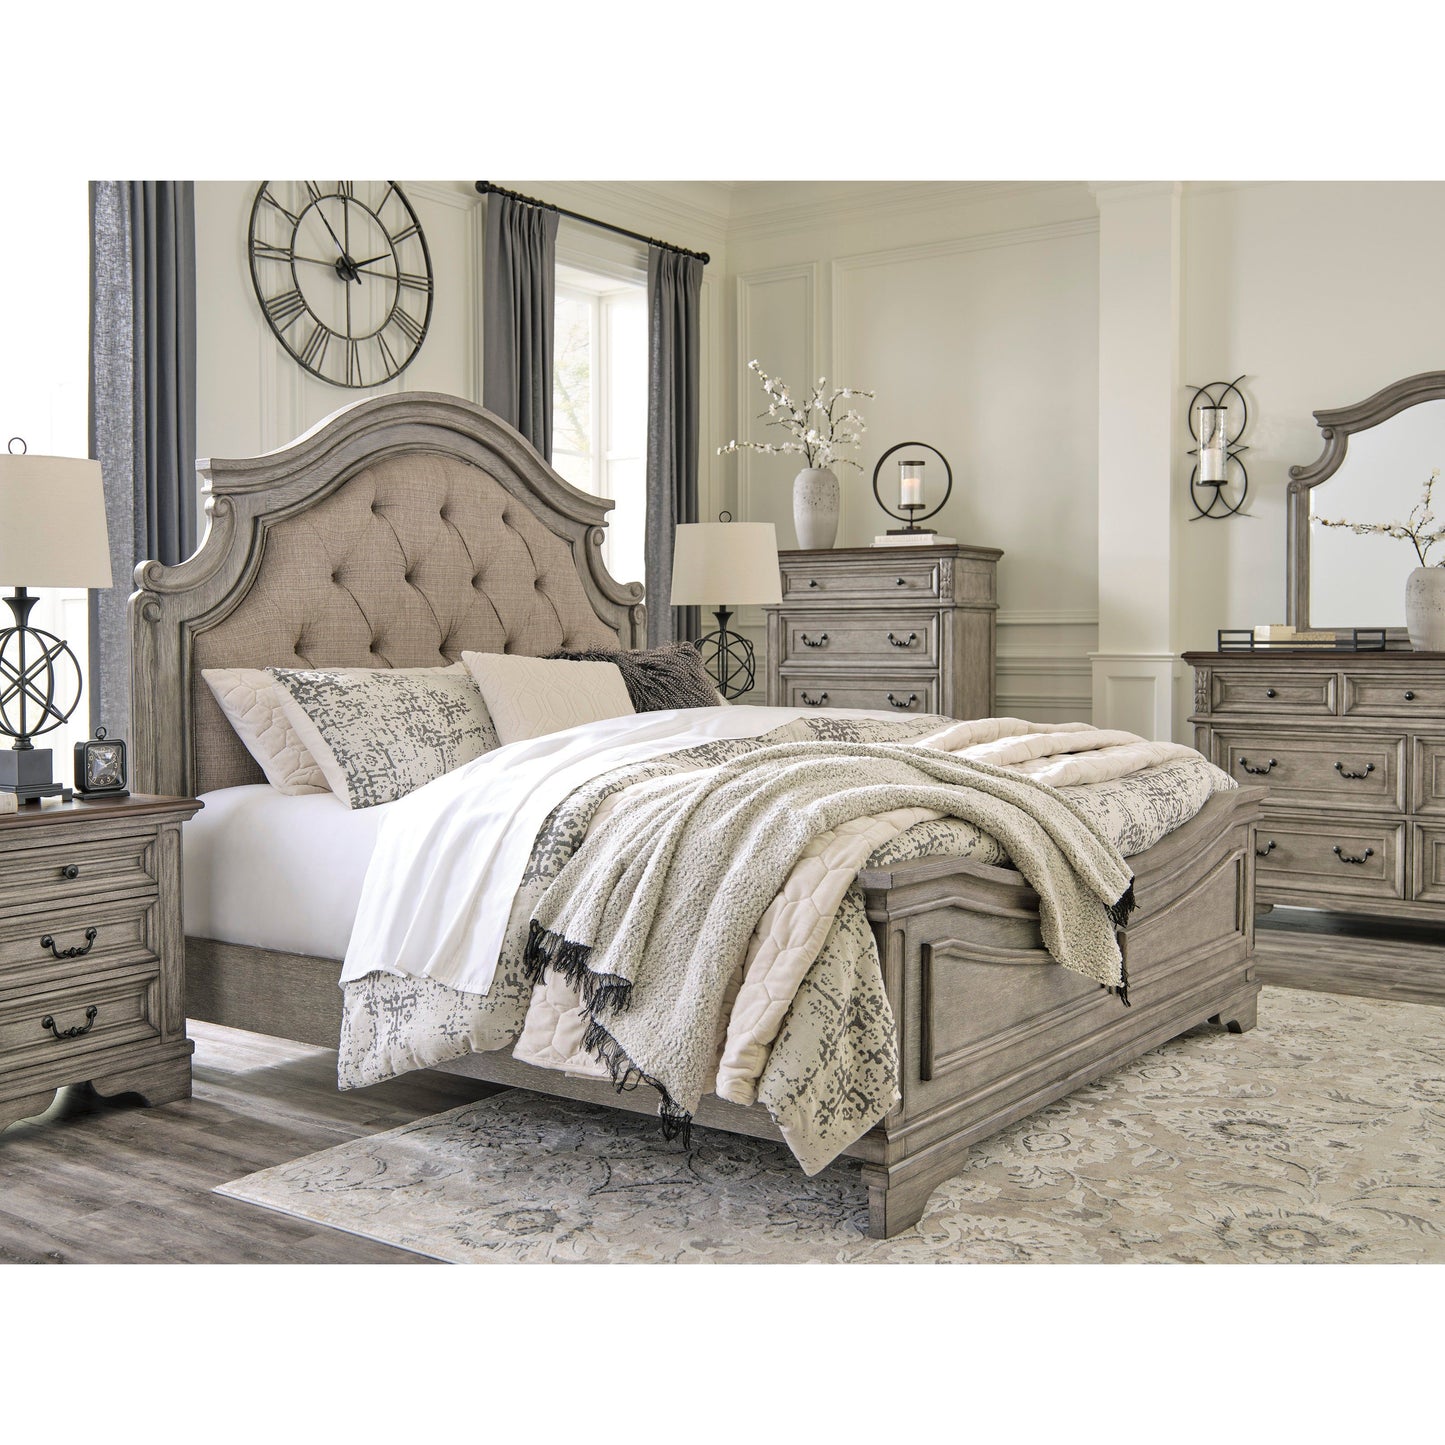 LODENBAY PANEL BED - ANTIQUE GRAY